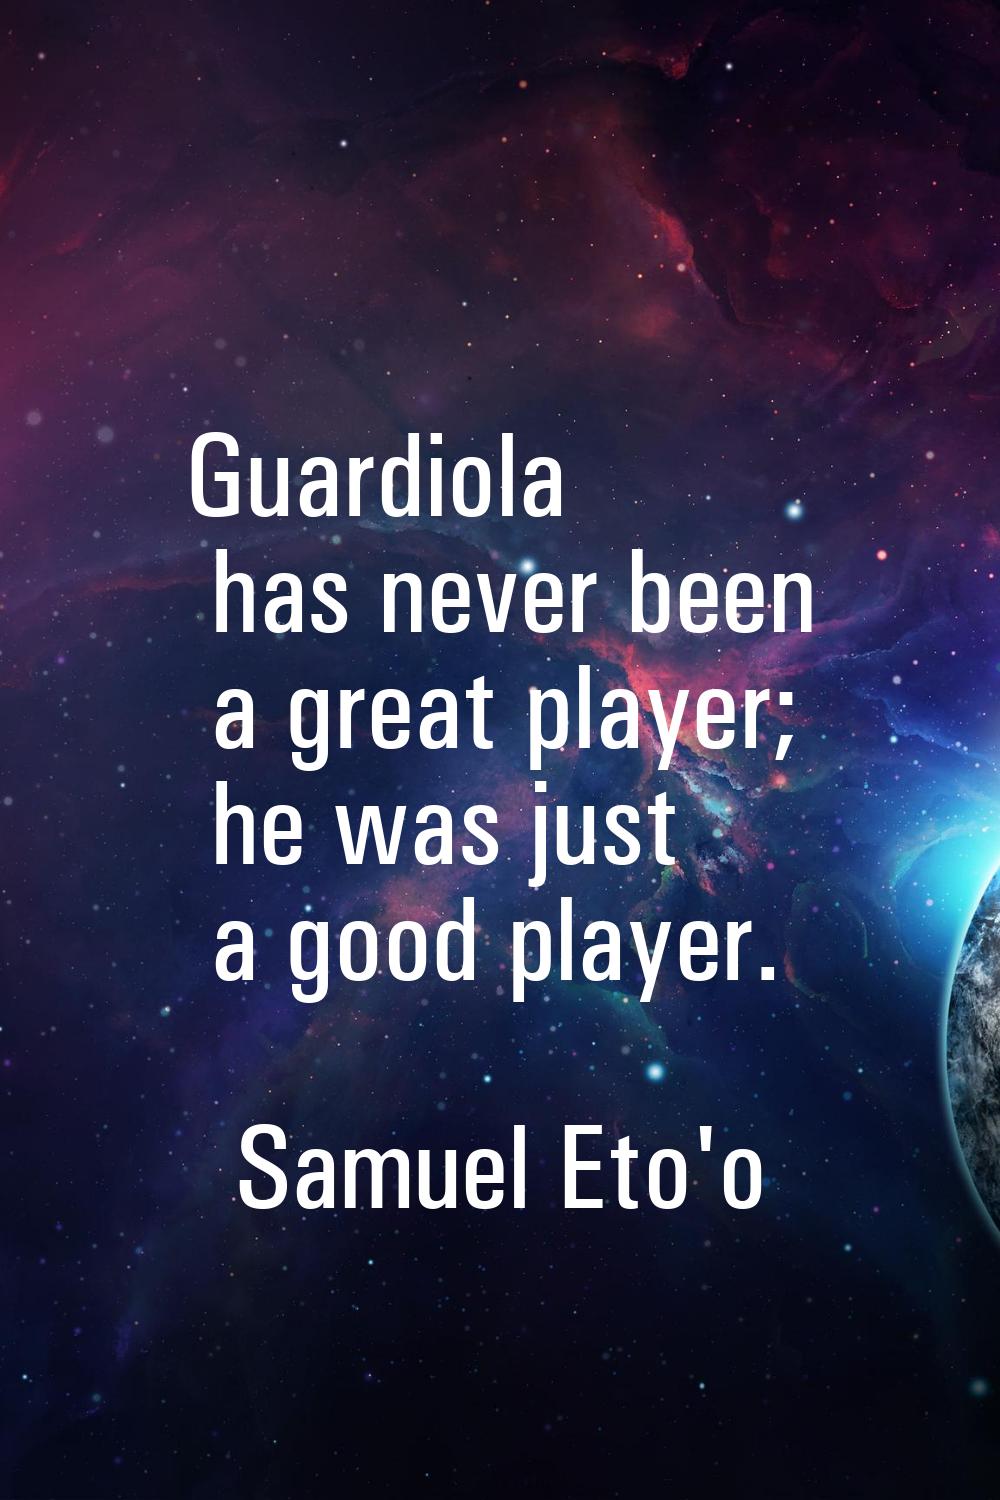 Guardiola has never been a great player; he was just a good player.